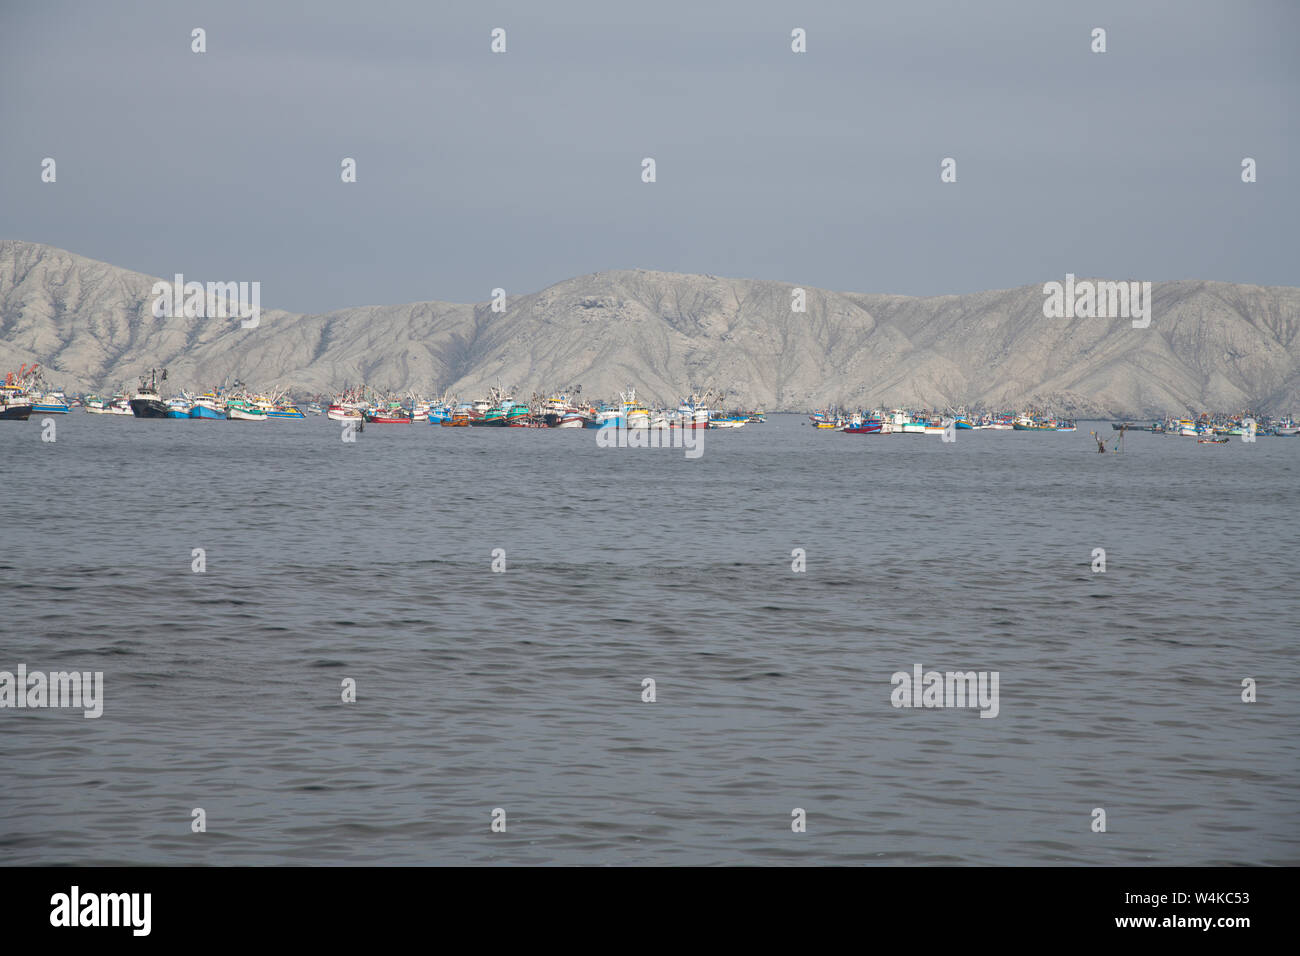 Desert,Dunes,Mountainous Highway,Canneries,Fishing Fleets,Anchovy Fishing,Sardines,Pan American Highway, Caral City ,North of Lima,Peru,South America Stock Photo